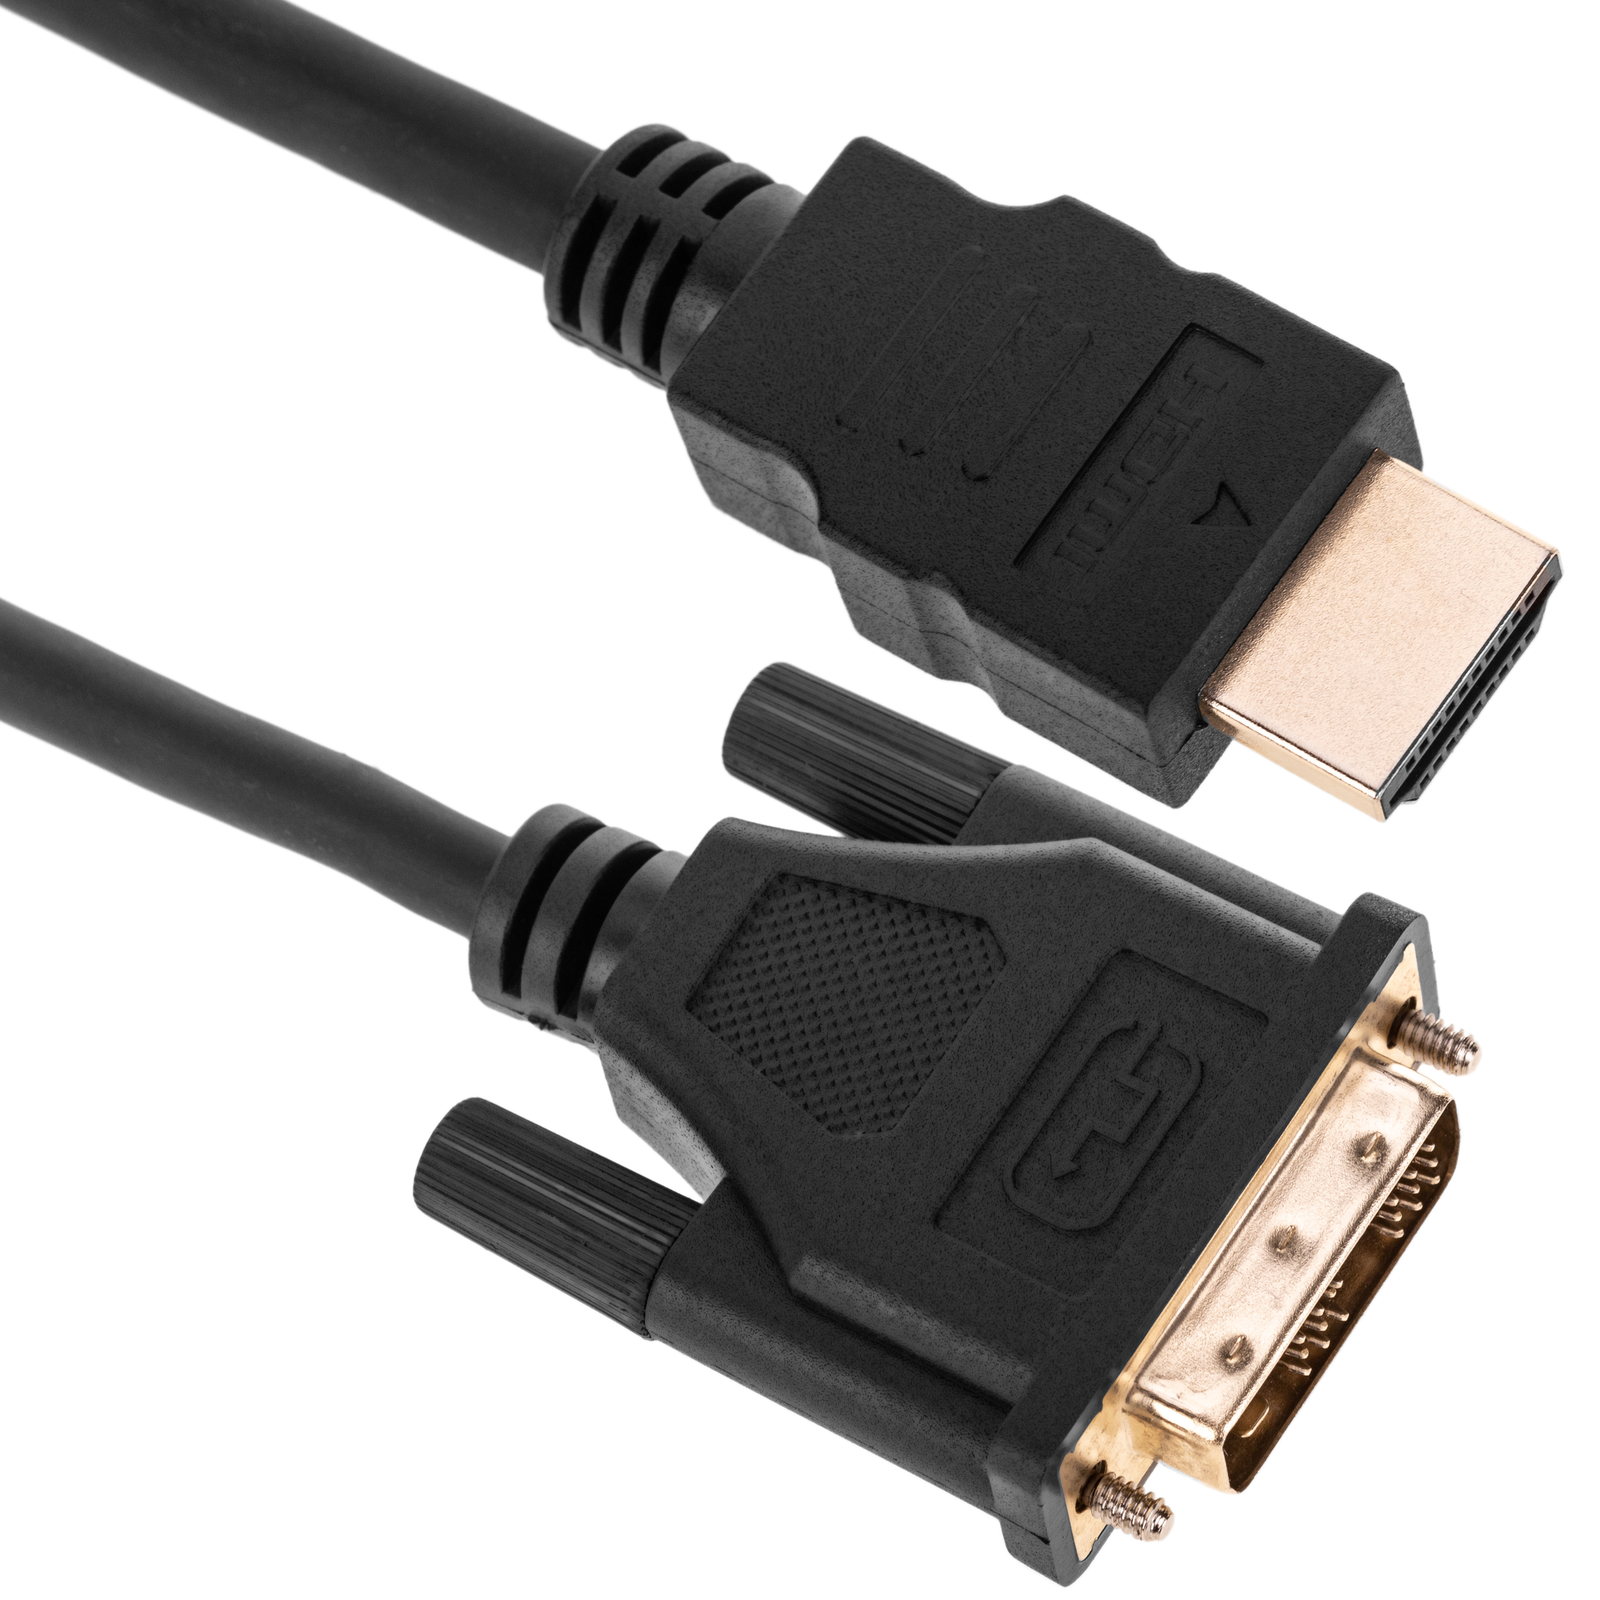 HDMI TO VGA Cable - 1.5 M Net-Power Buy, Best Price in Oman